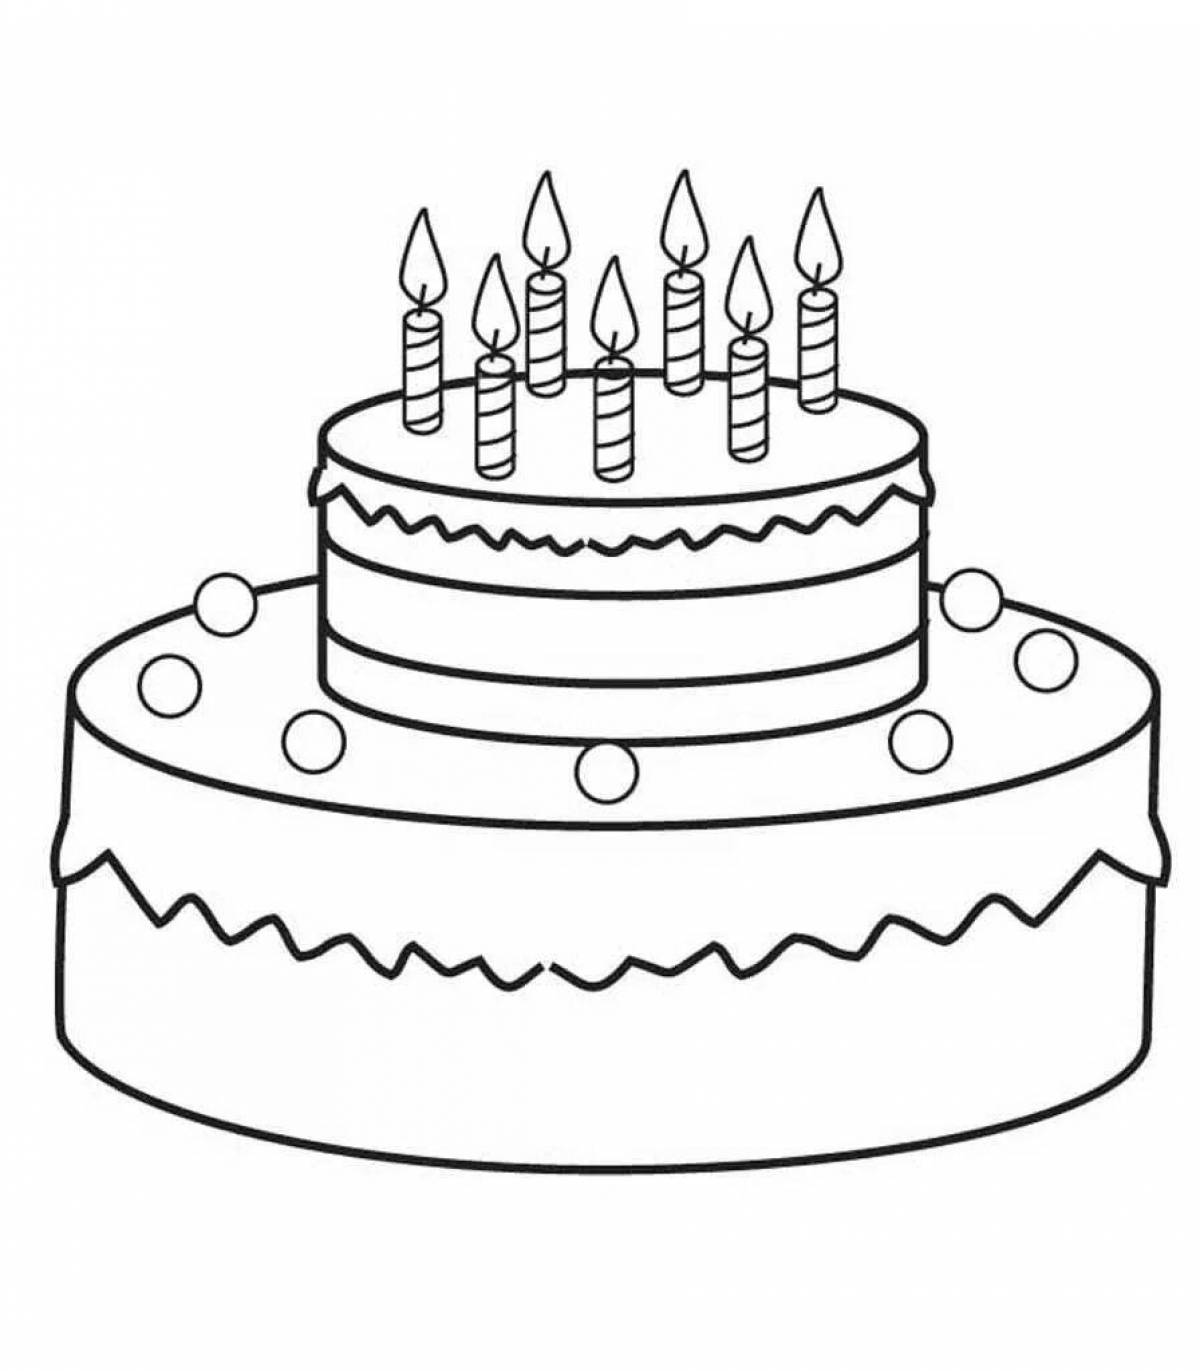 Colourful birthday cake coloring page